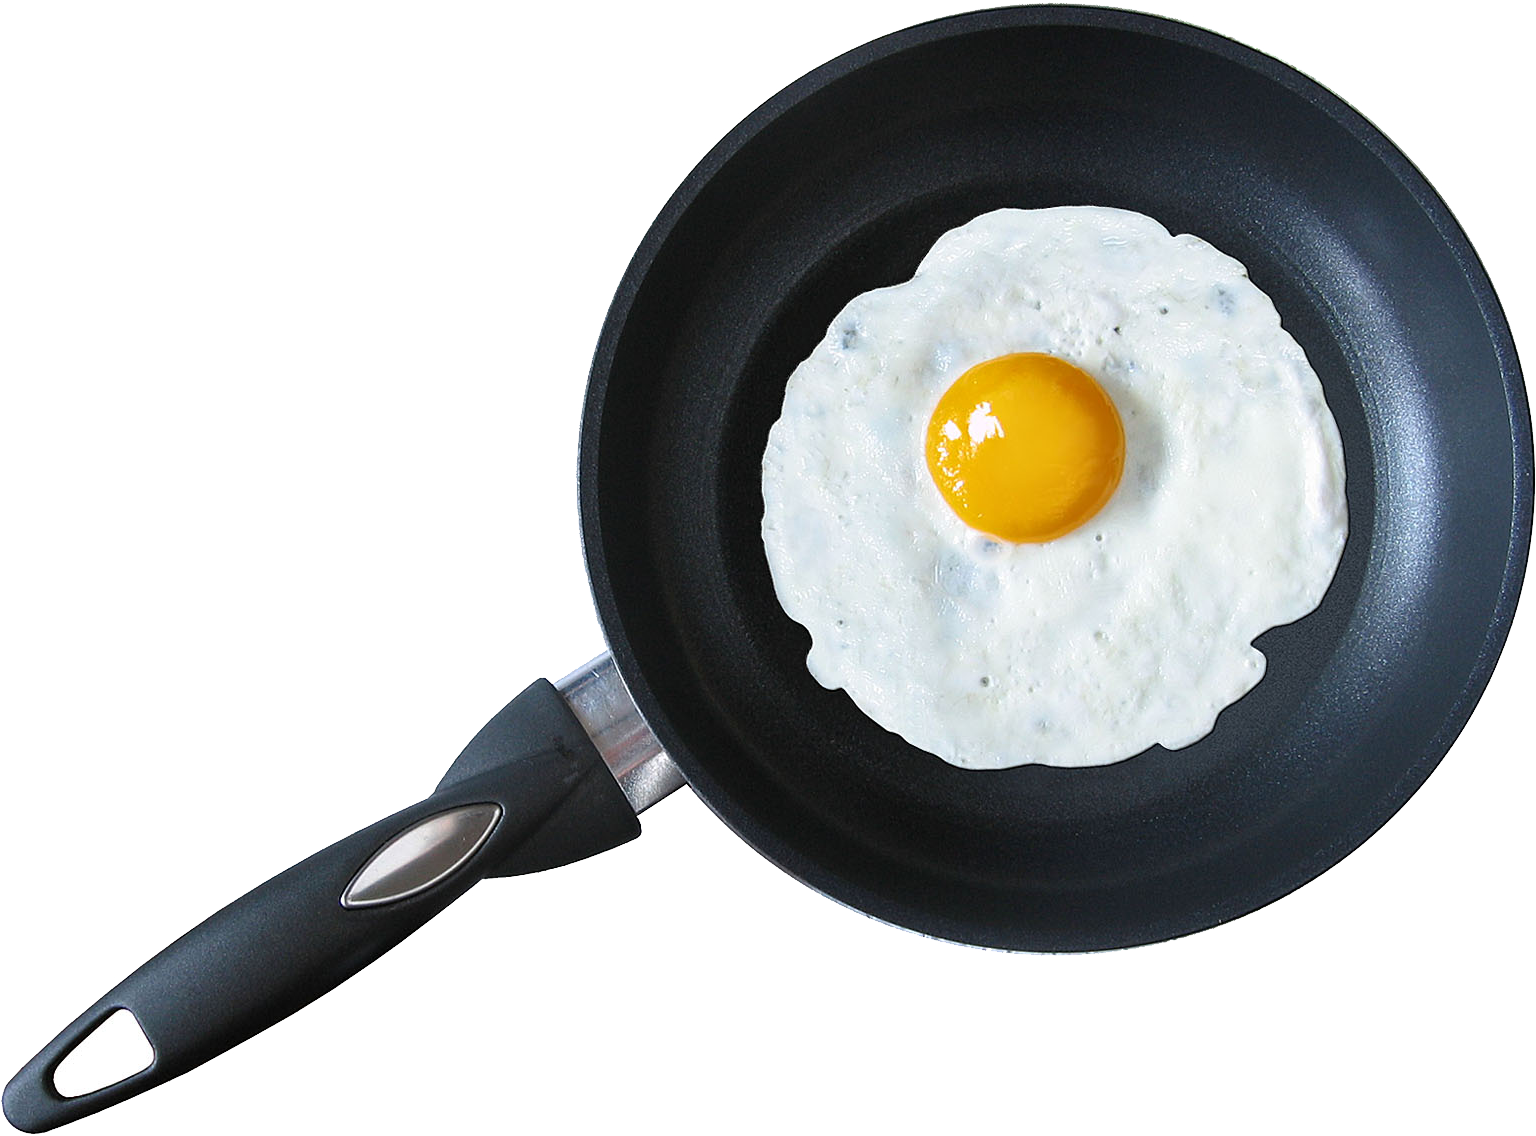 Frying pan PNG images Download 